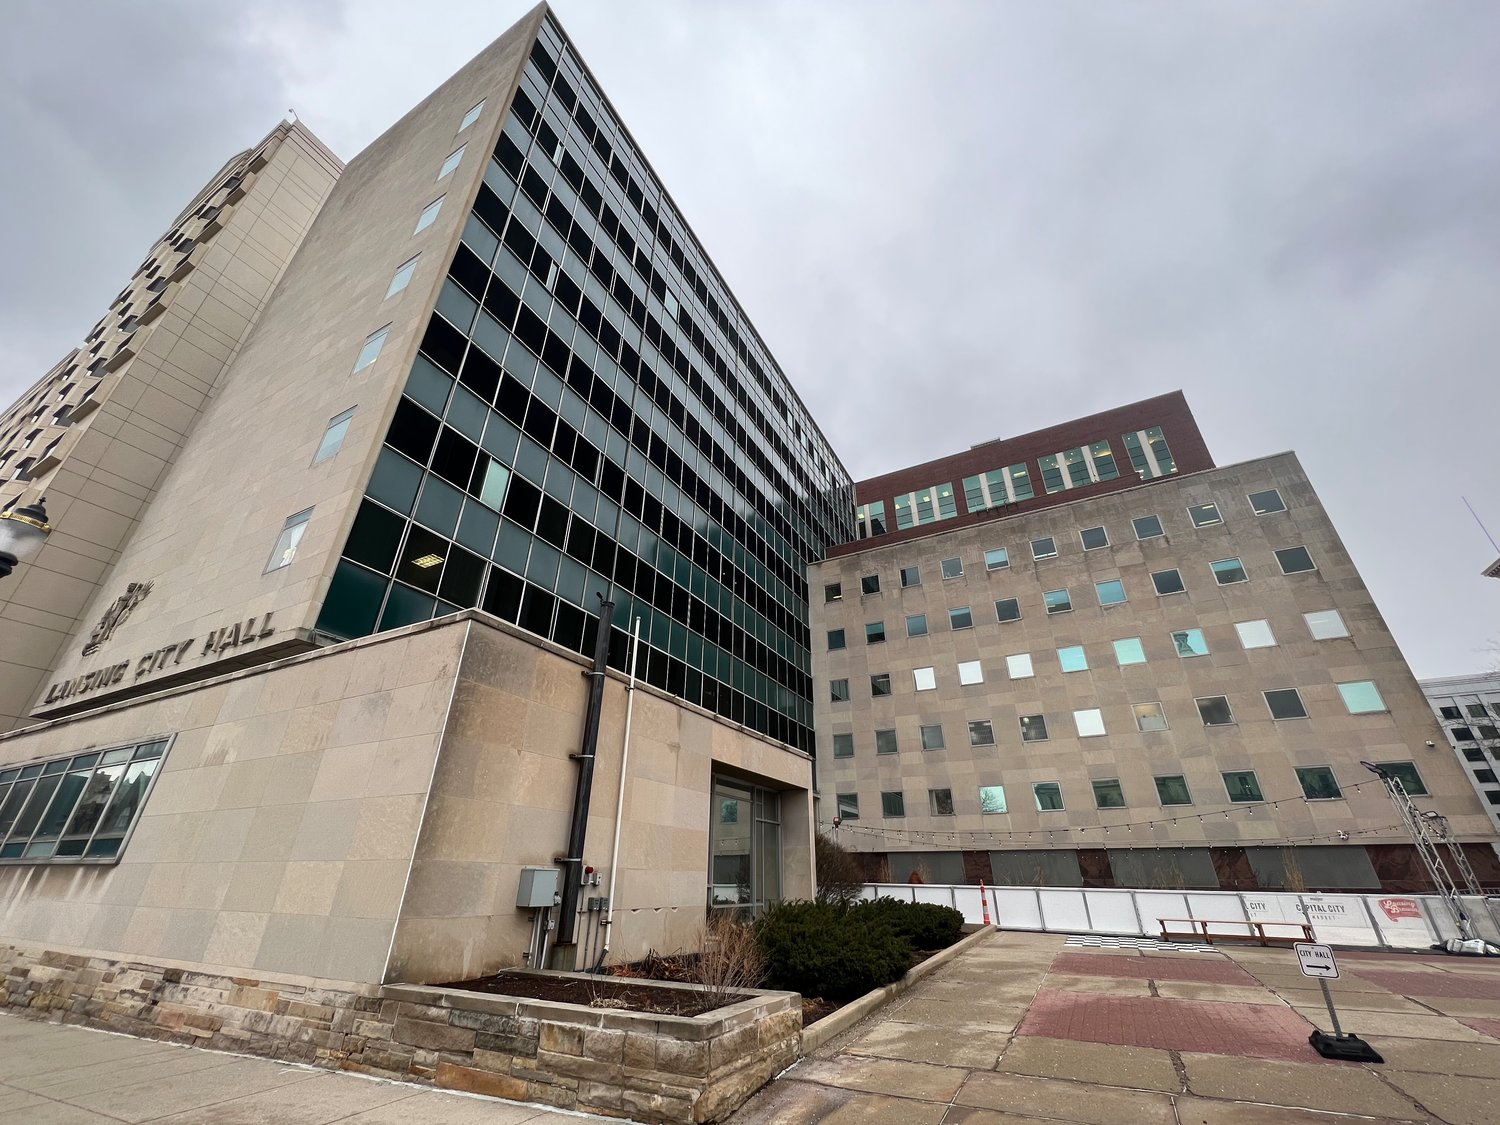 Construction began on the current Lansing City Hall building on the corner of Michigan and Capitol avenues in 1956. Annual maintenance costs on the 10-story office building have swelled to about $600,000.